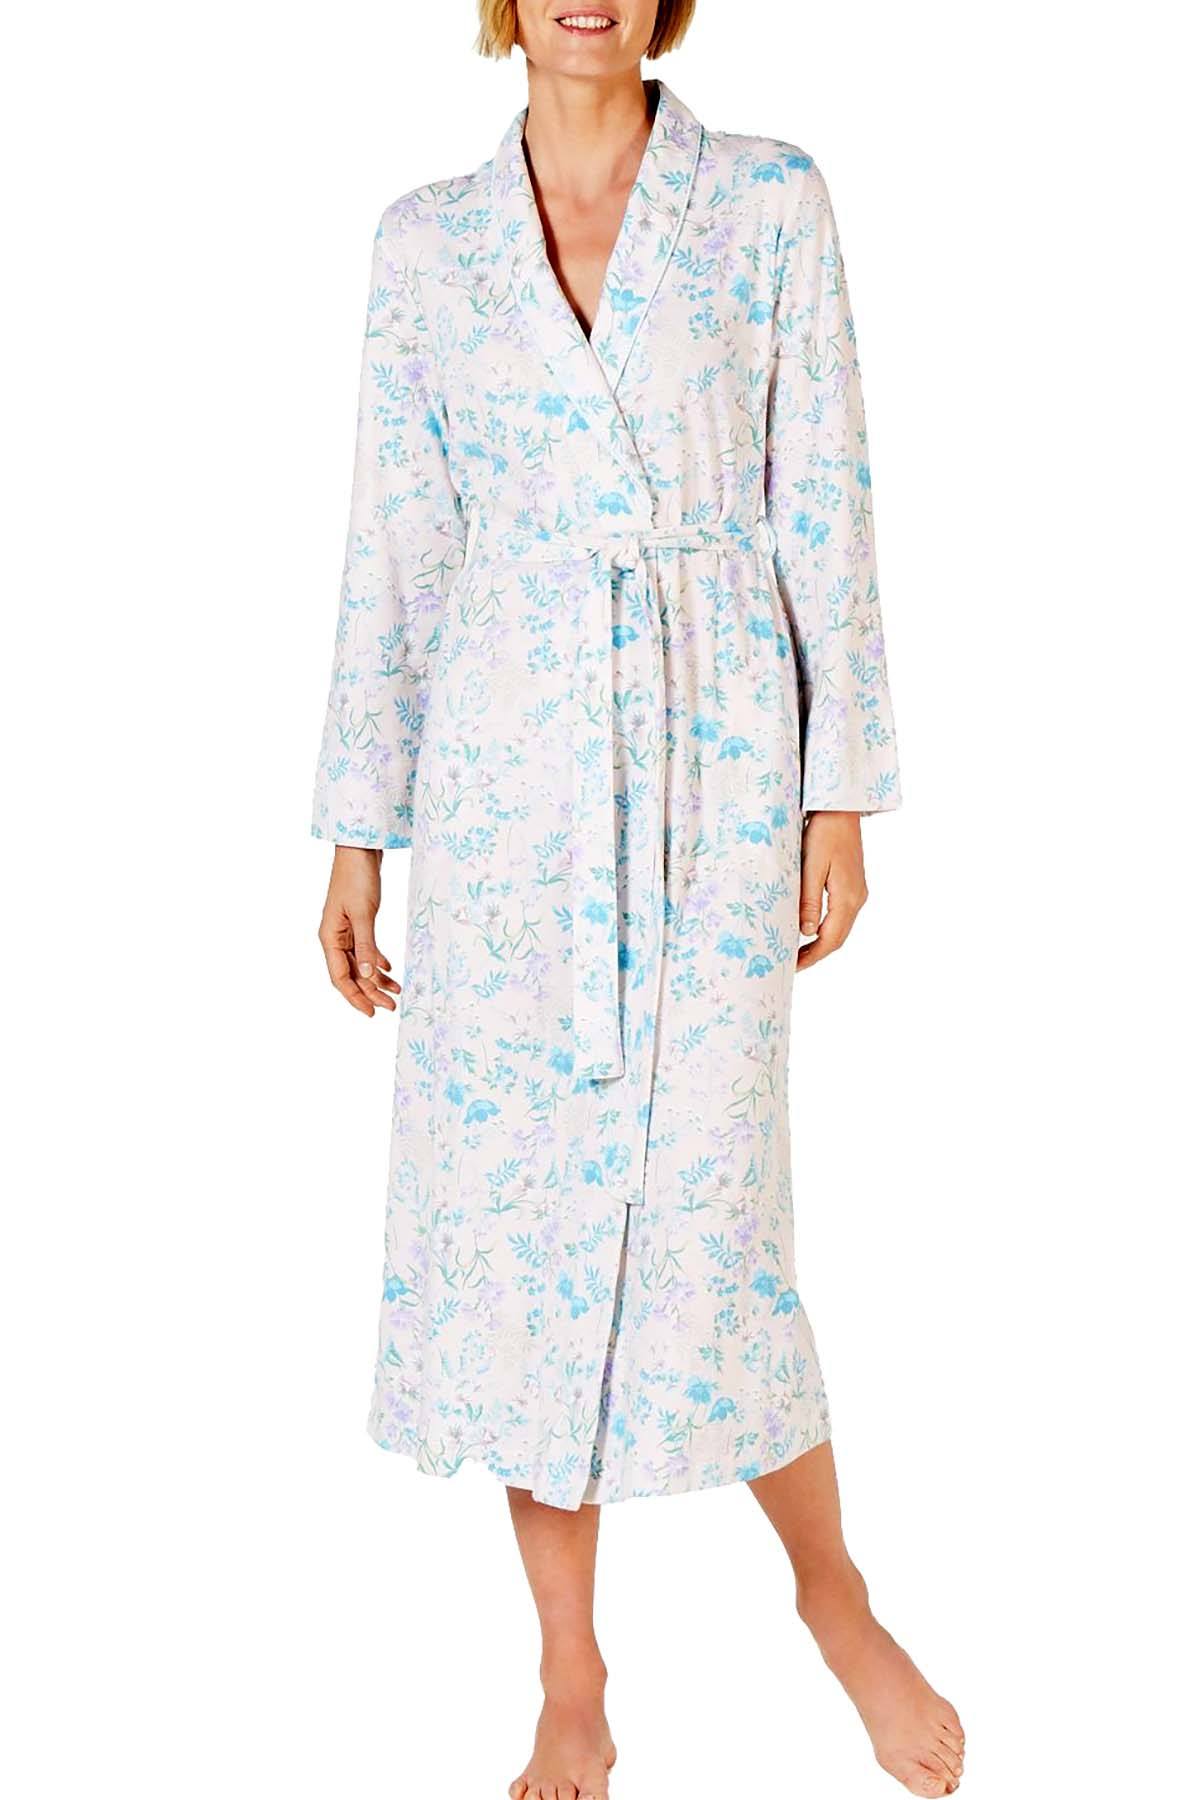 Miss Elaine Cottonessa Printed Long Sleeve Knit Robe in Botanical Floral